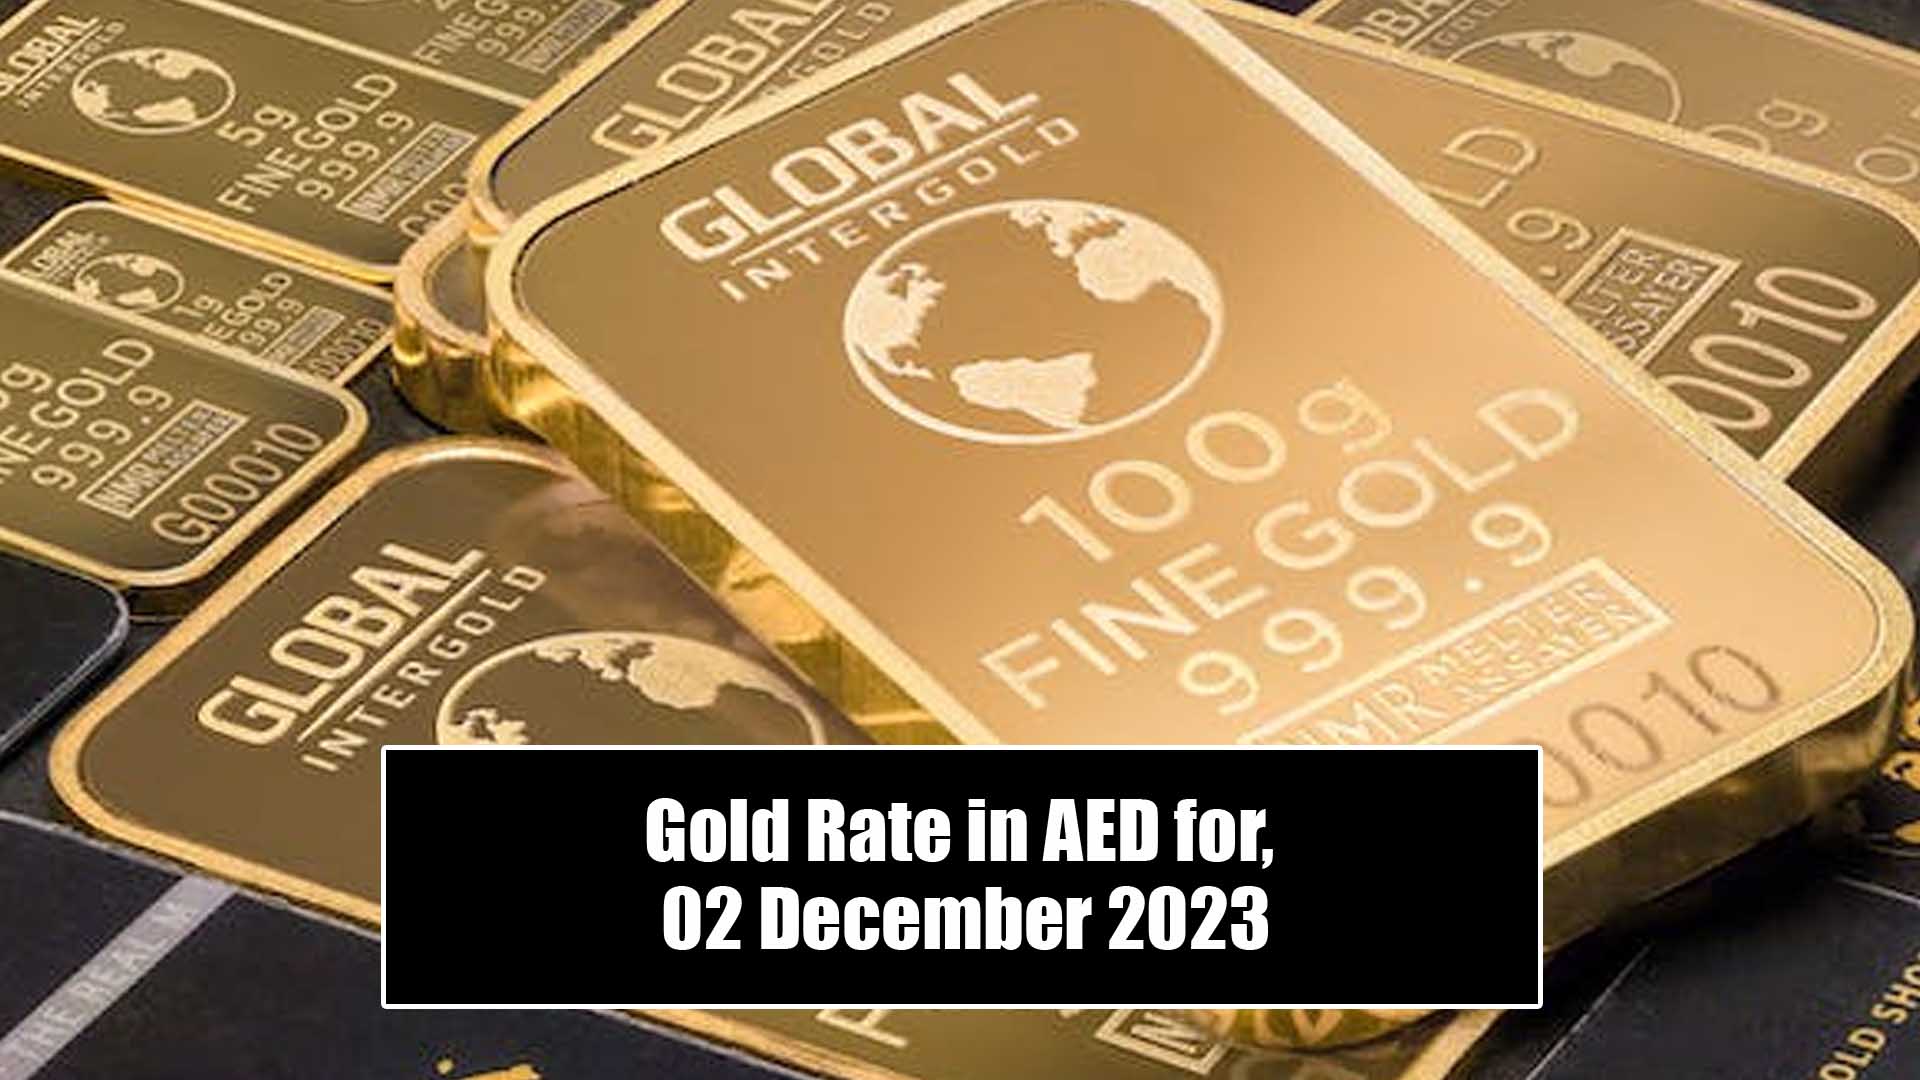 Gold Rate in AED for, 02 December 2023